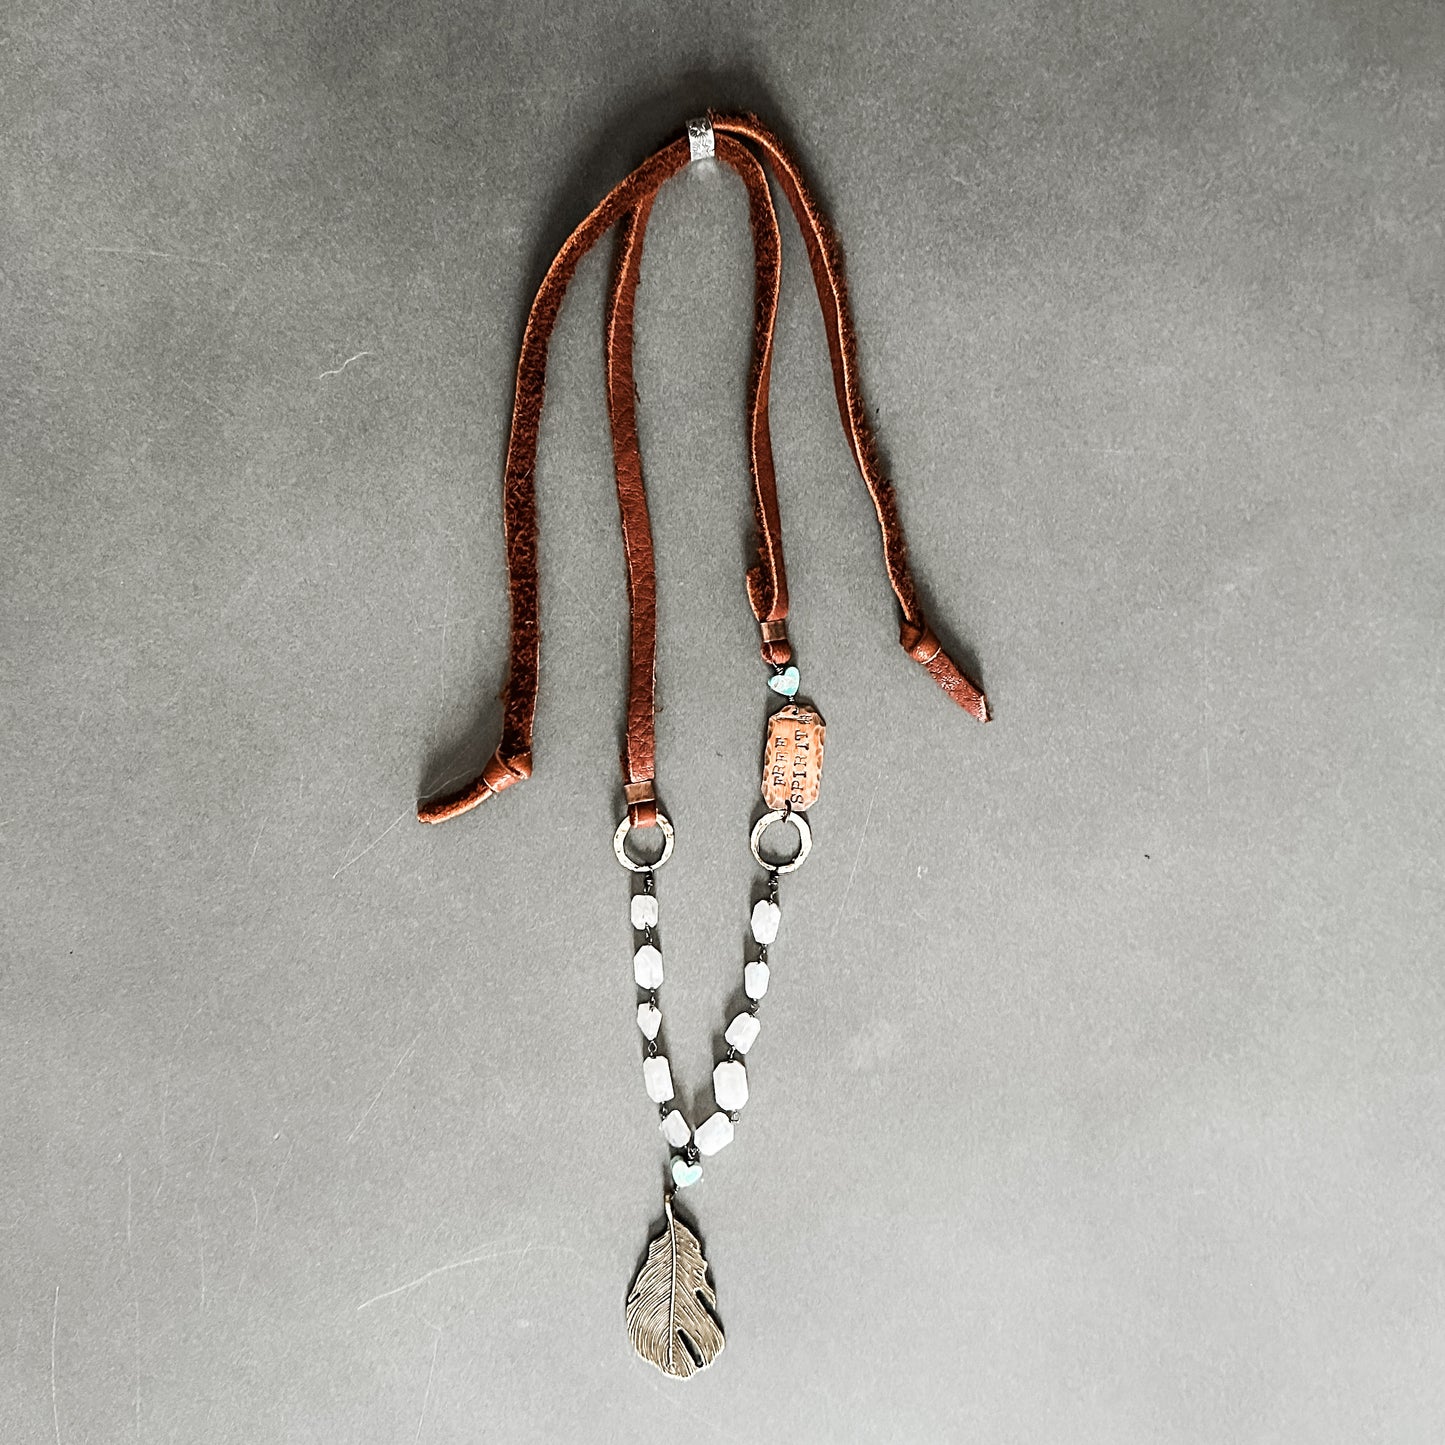 Free Spirit Necklace - Exclusive Handmade Jewelry for Bourbon Cowgirl